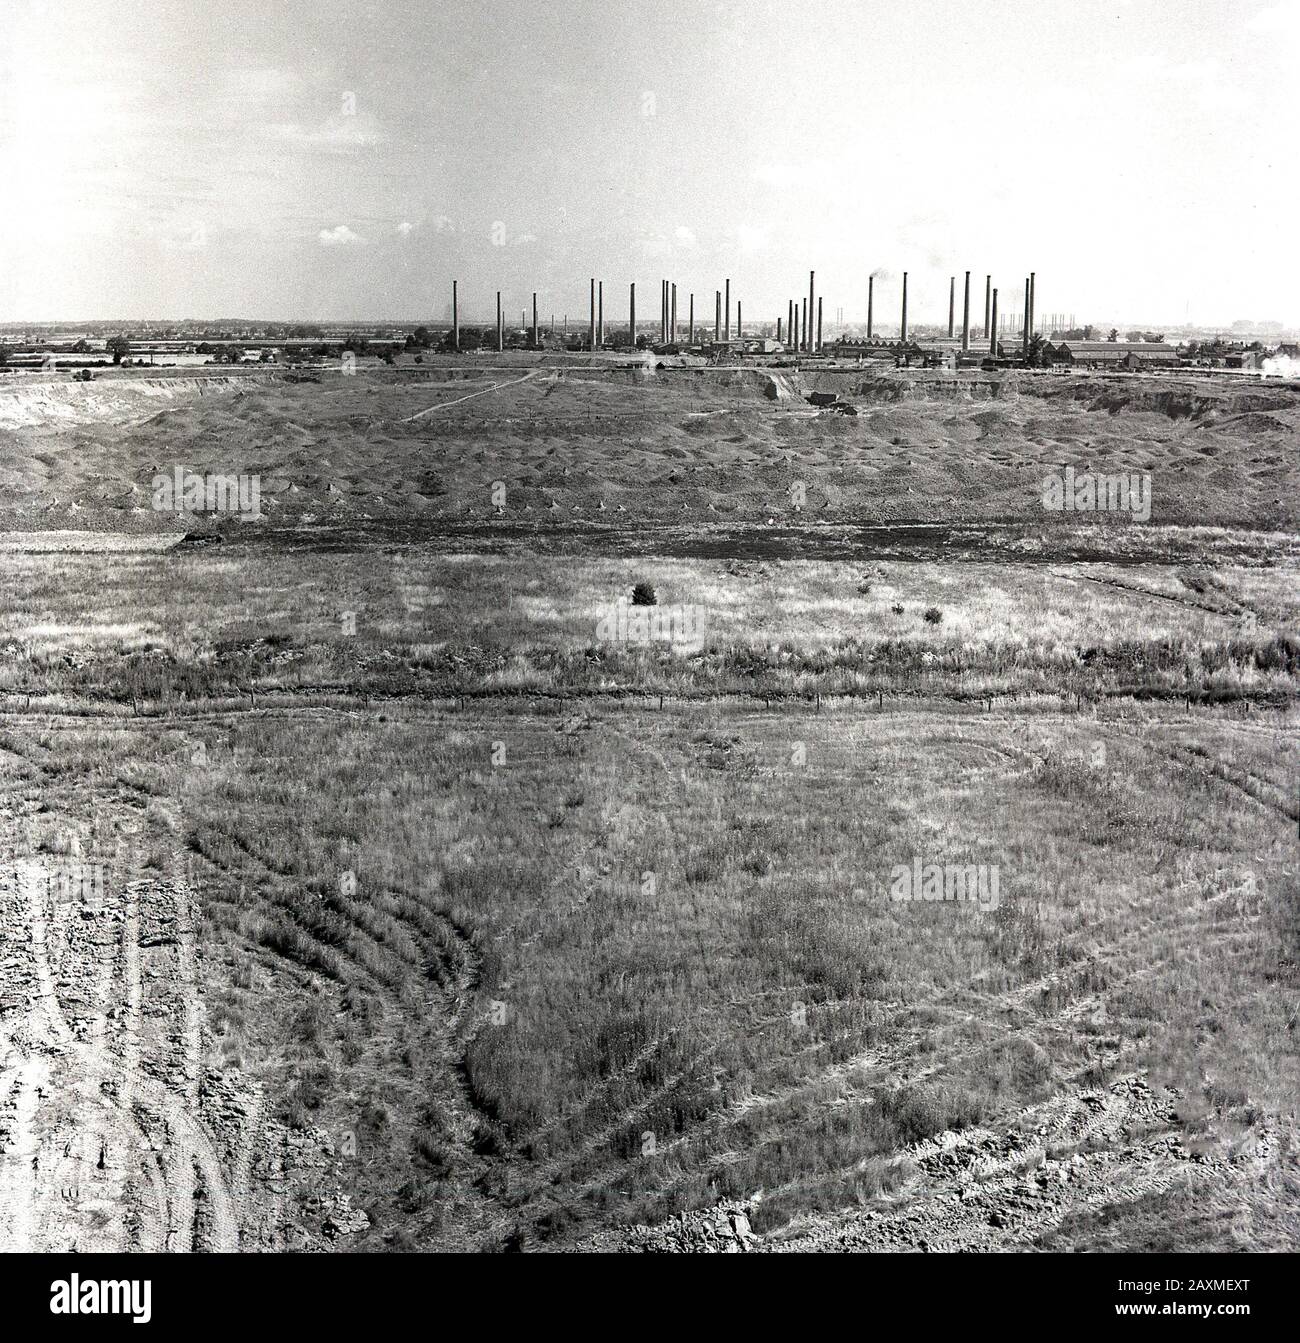 1950s, historical, a view across the landscape and clay soils of the Marston Vale towards the giant Stewartby brickworks of the London Brick Company, Bedfordshire, England, UK. Across the Vale there was a total of 162 chimneys, while at Stewartby, there were 32 chimneys, which at this time, was the largest brickworks in the world. The clayland of the Marston Vale is famous for is oxford clay, the main ingredient in the London Brick. Stock Photo